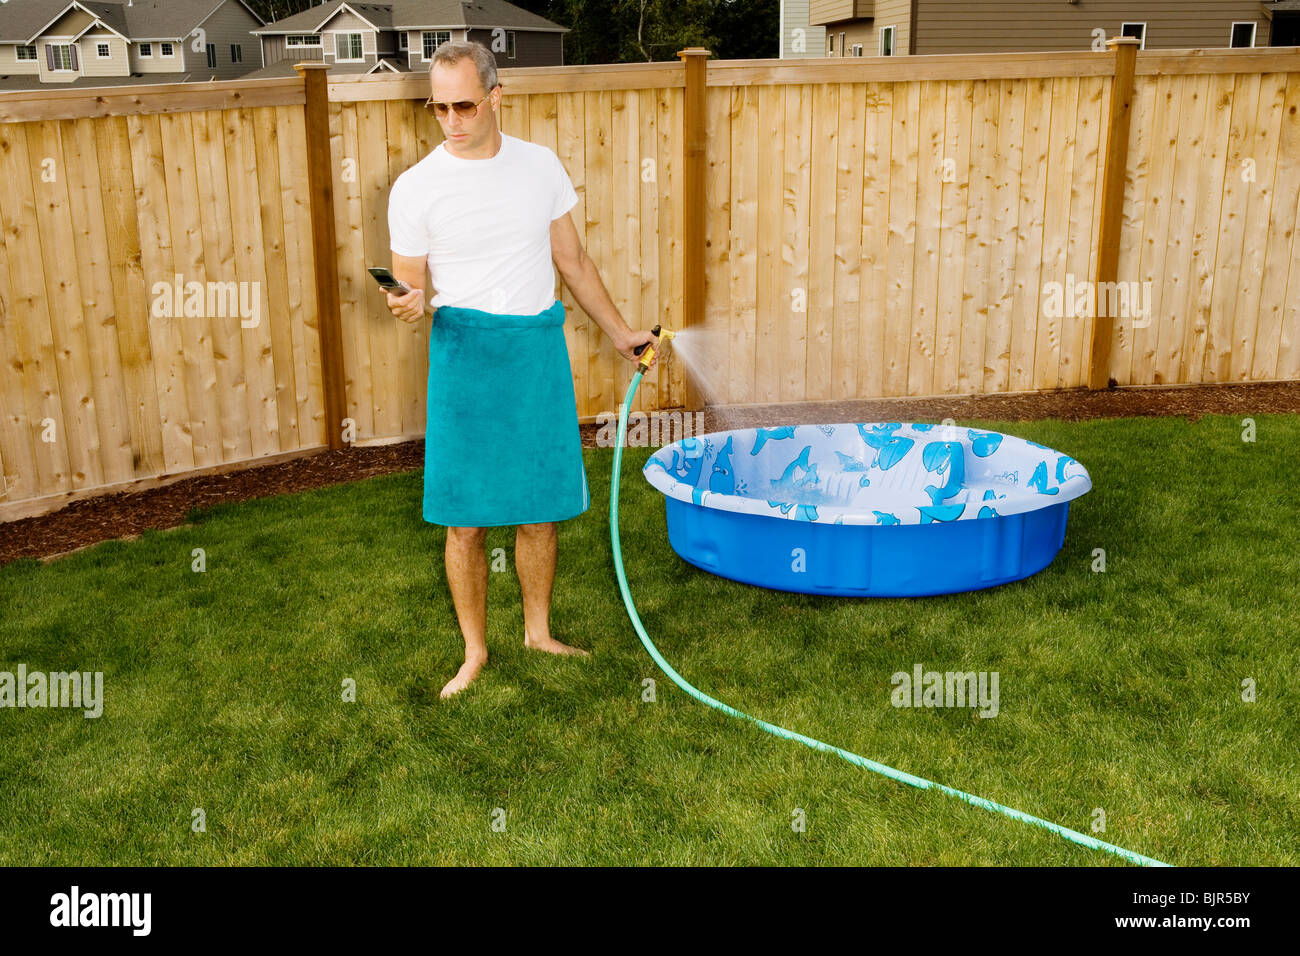 Man in yard with cell phone and hose Stock Photo